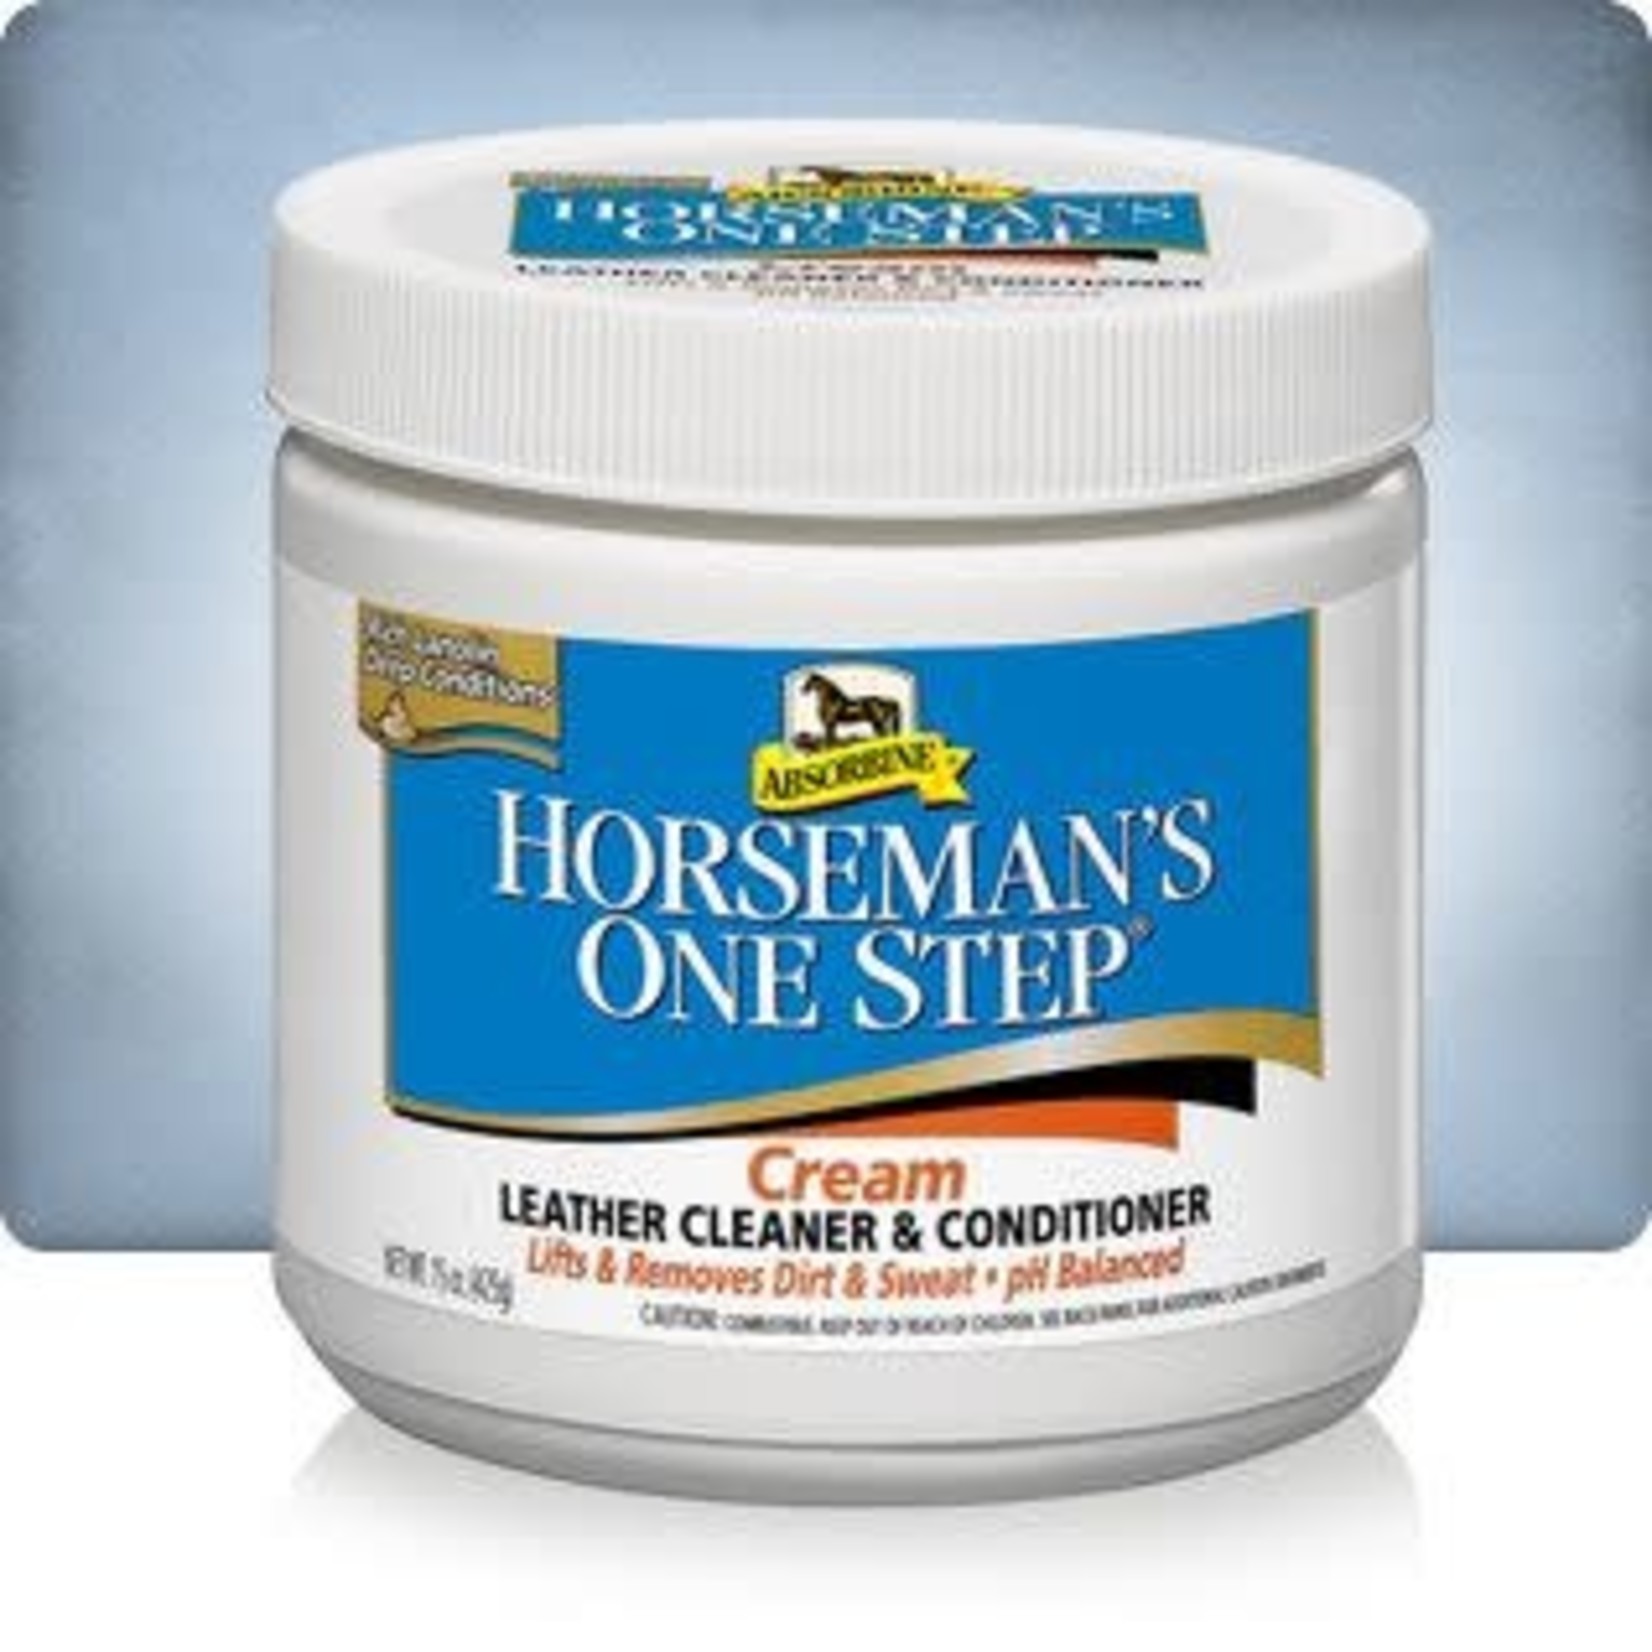 Absorbine Horseman's One Step Leather Cleaner&Conditioner 425g